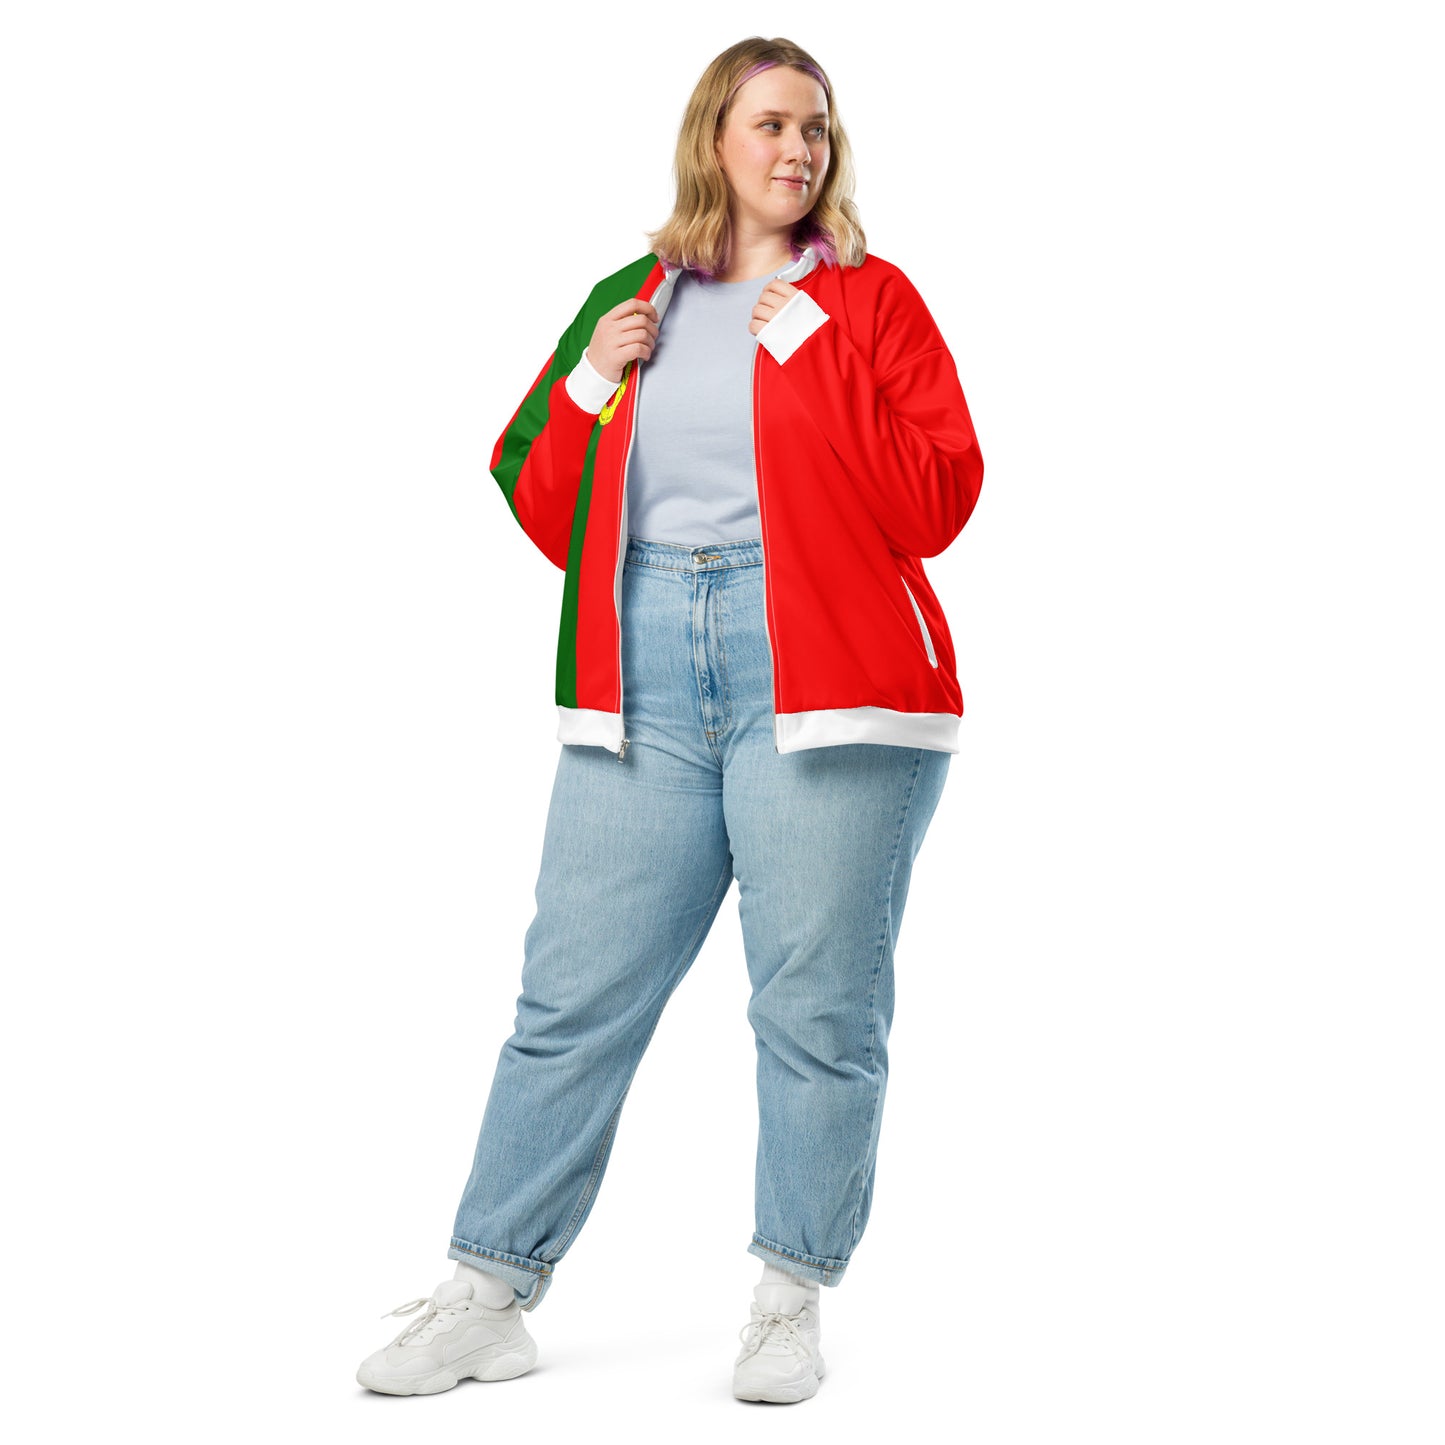 Portugal Team Spirit Jacket: Stand Out from the Crowd